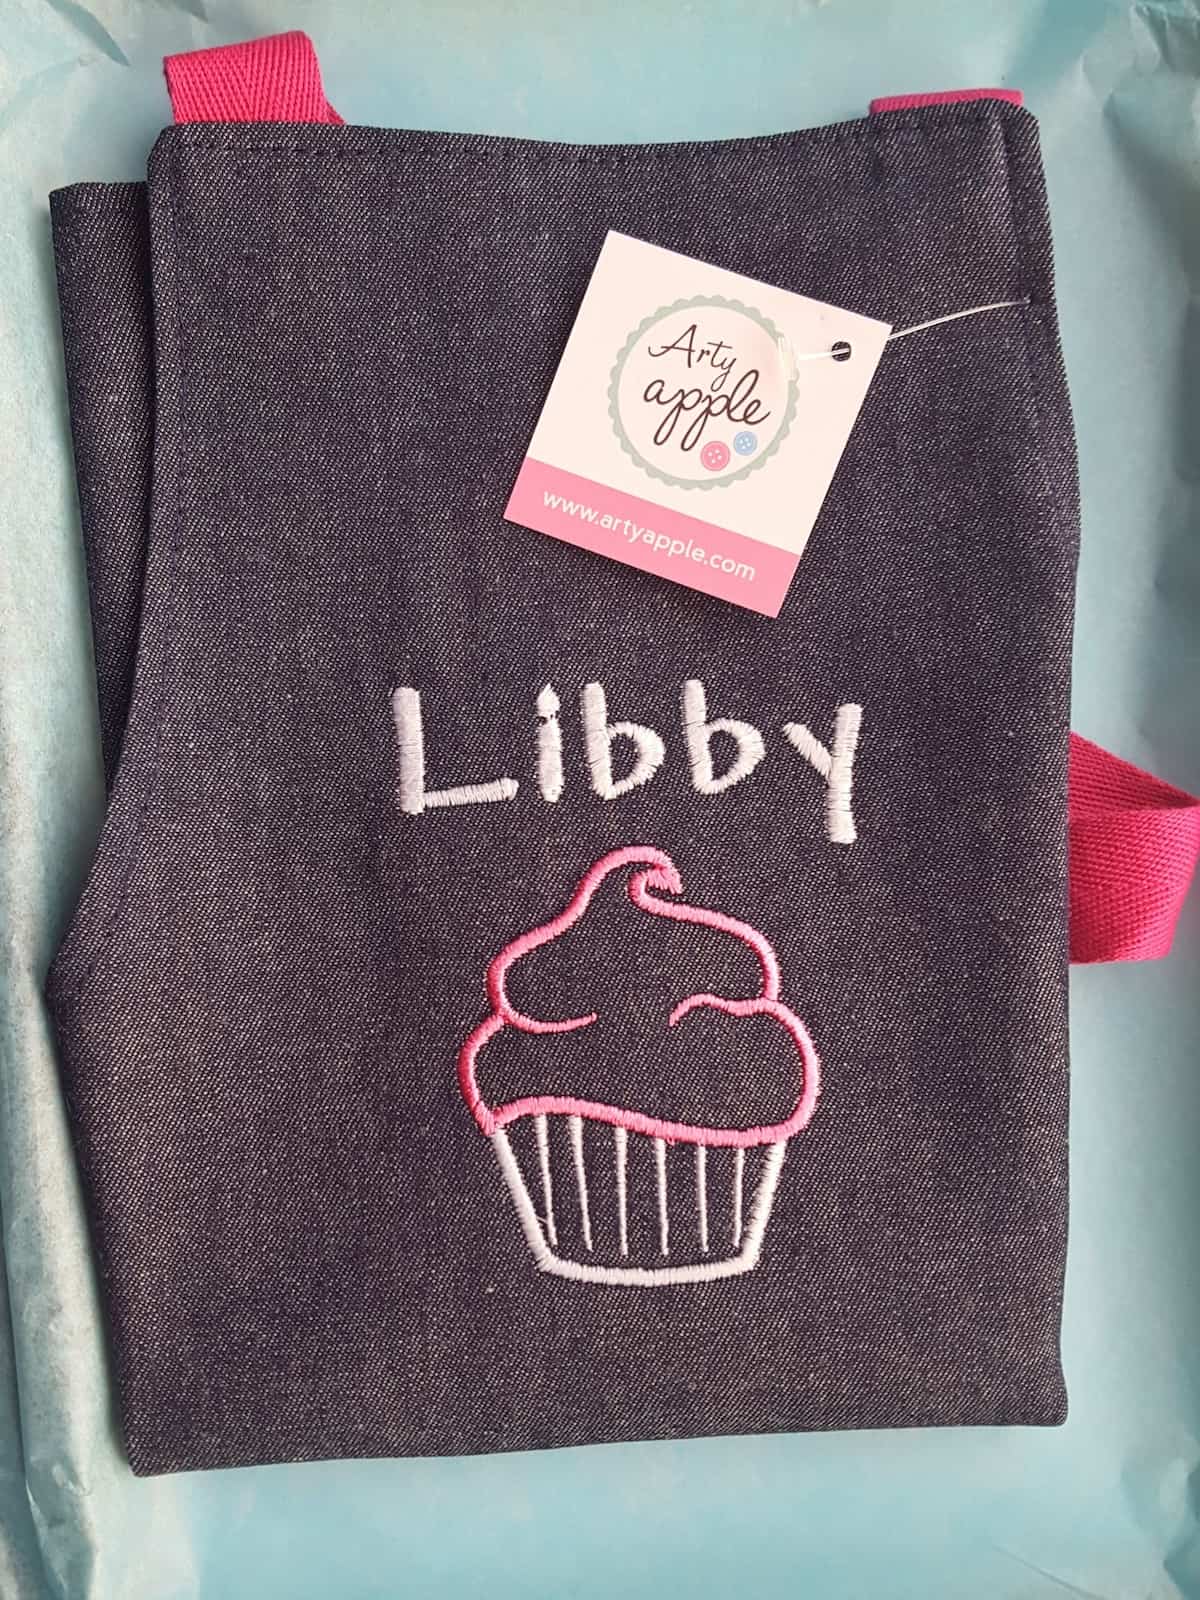 Arty apple focus is on quality, affordability and the personal touch that comes with each item being specially made for the child who will receive it. We have reviewed the personalised girls' aprons and you have the chance to win one. 